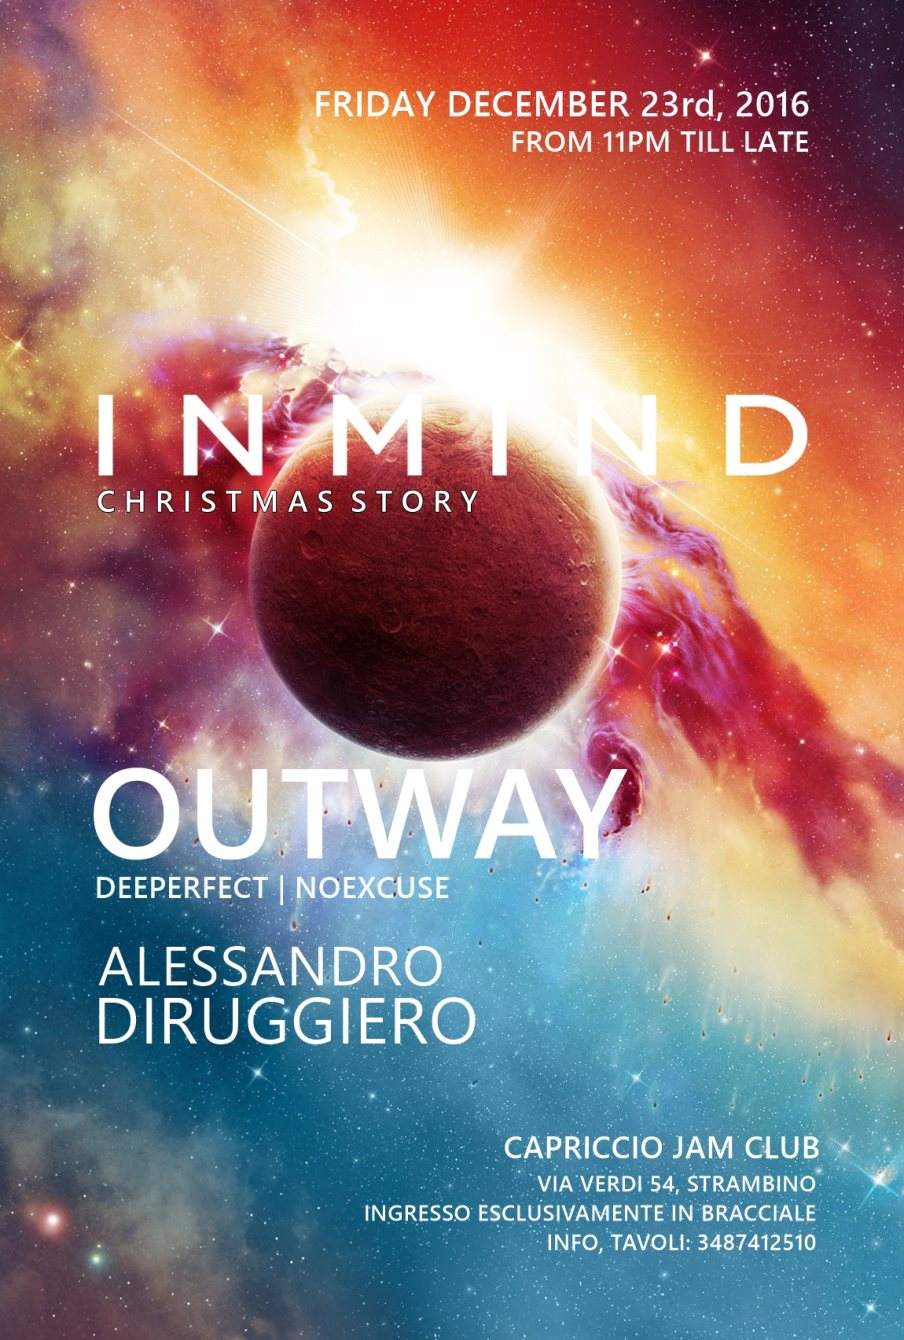 Inmind Christmas Story with Outway, Alessandro Diruggiero - フライヤー裏